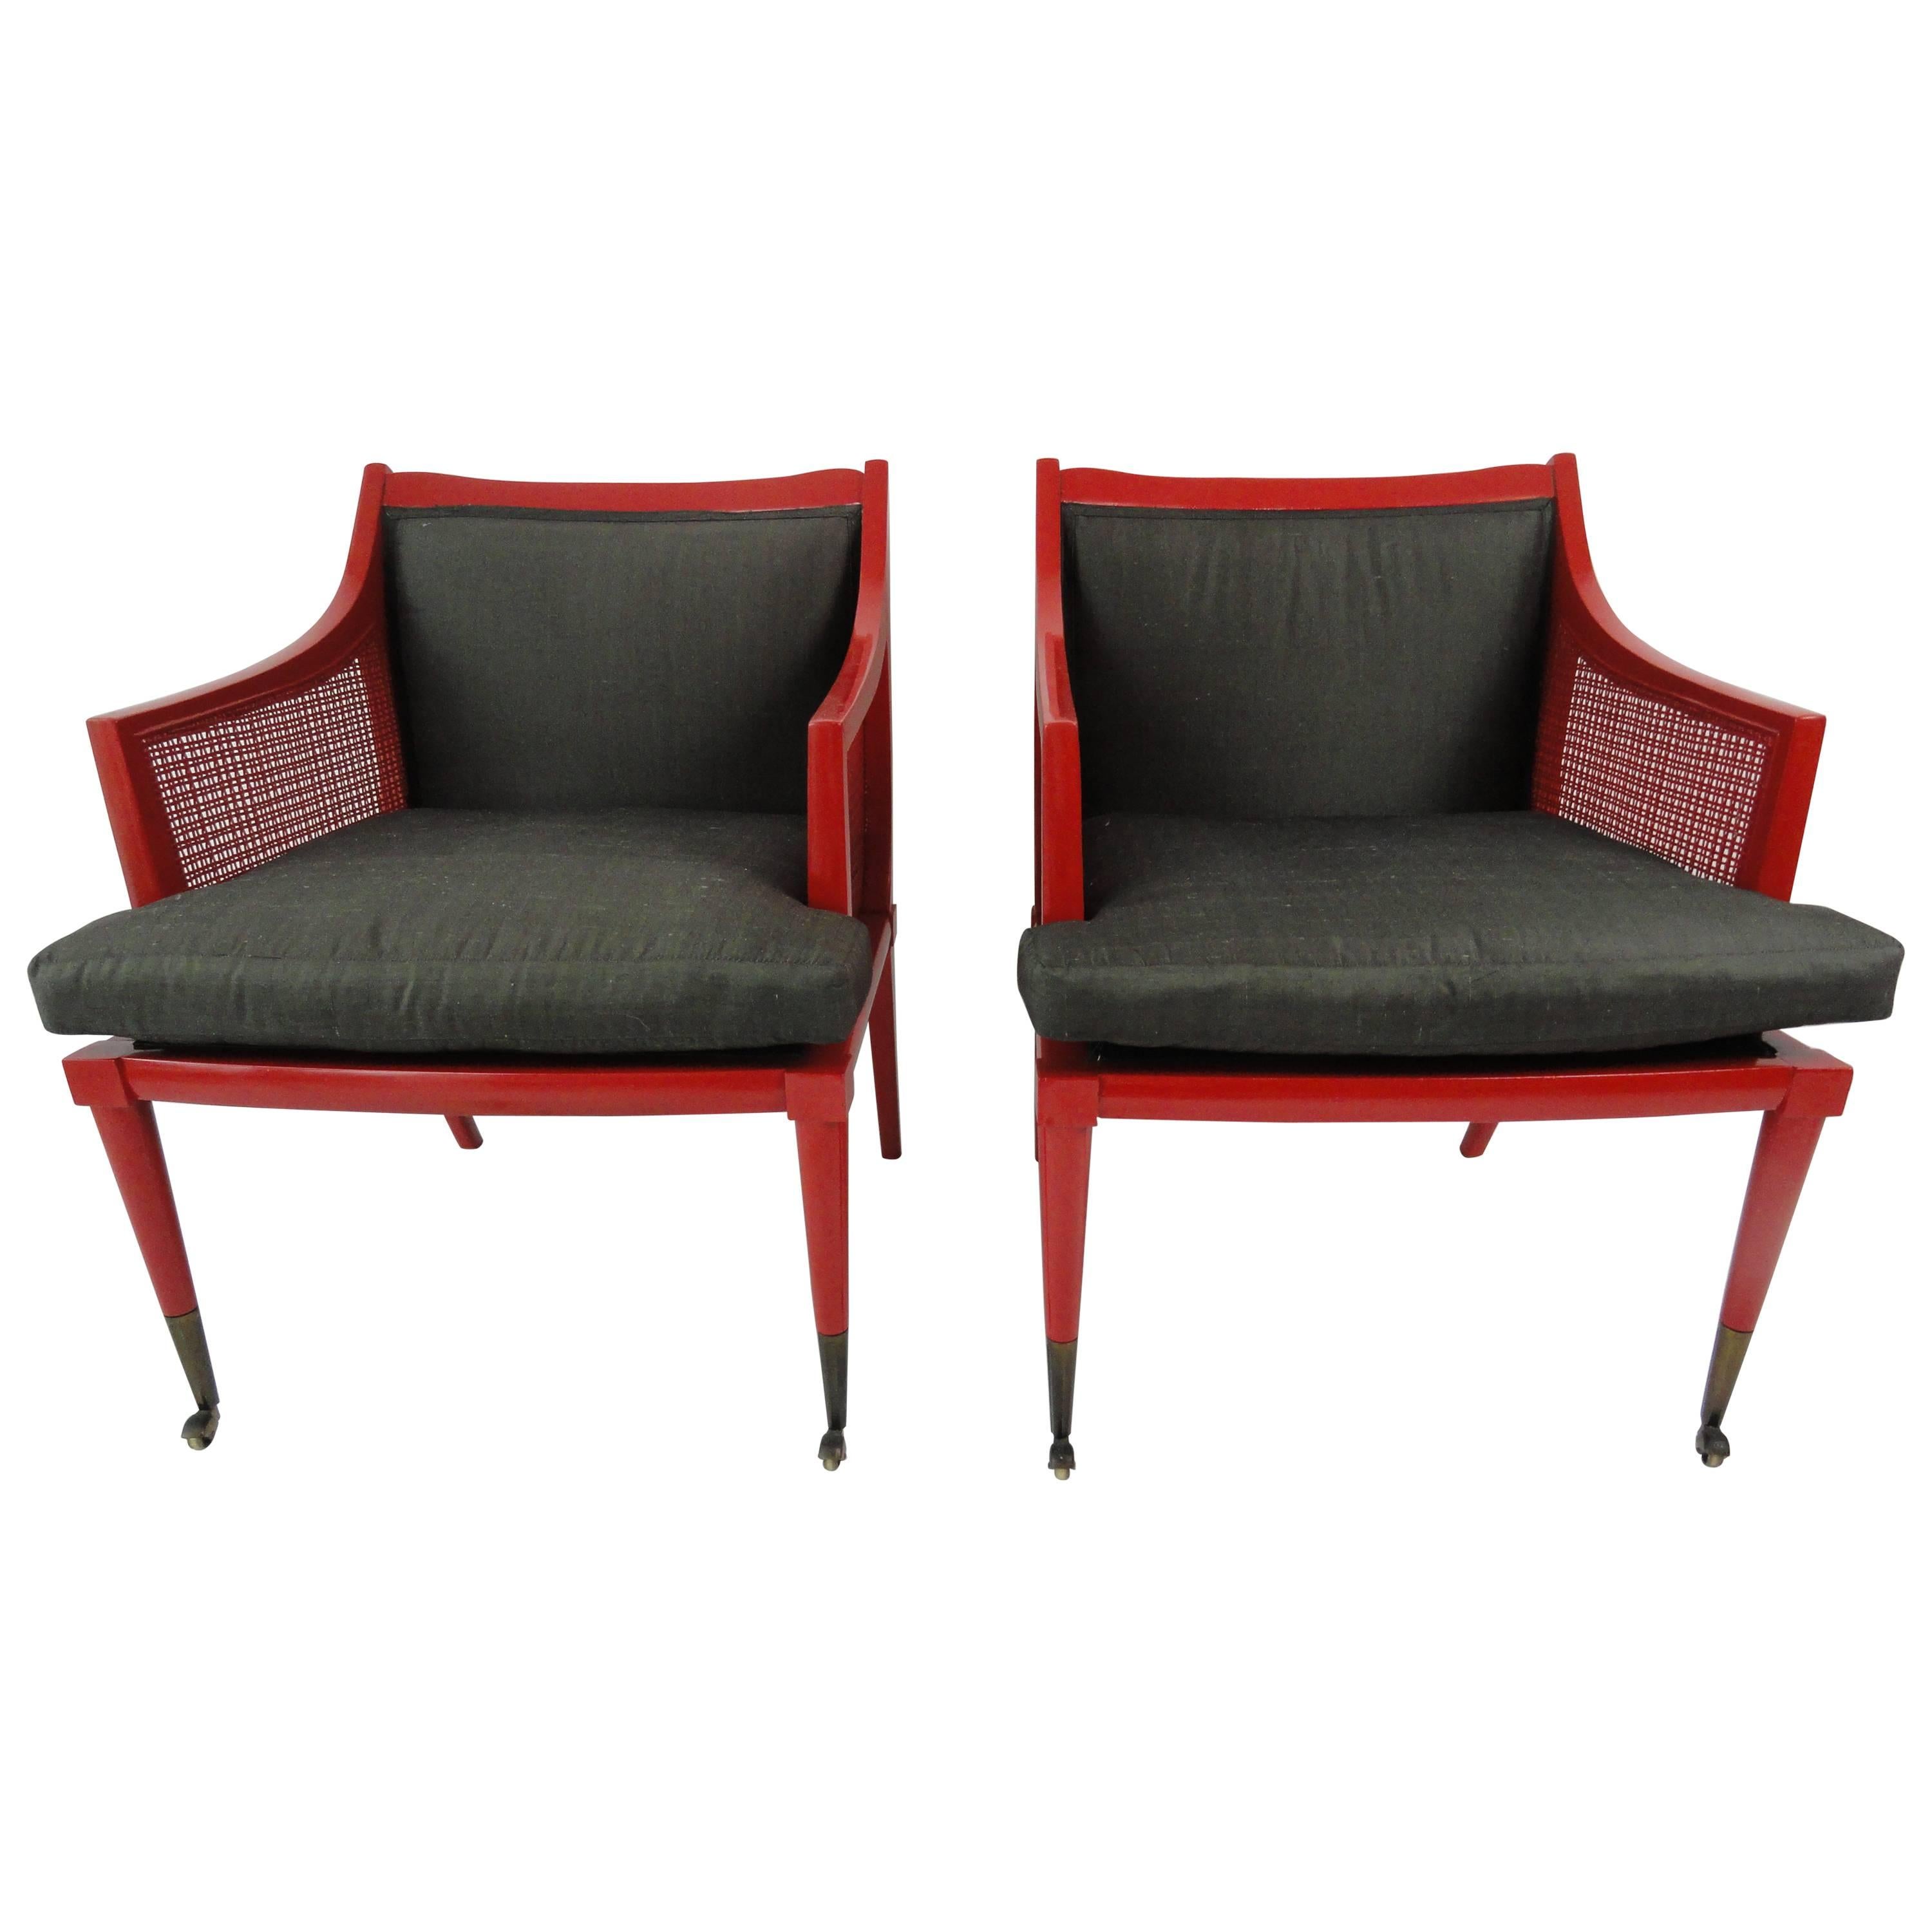 Pair of Edward Wormley Chairs for Dunbar For Sale